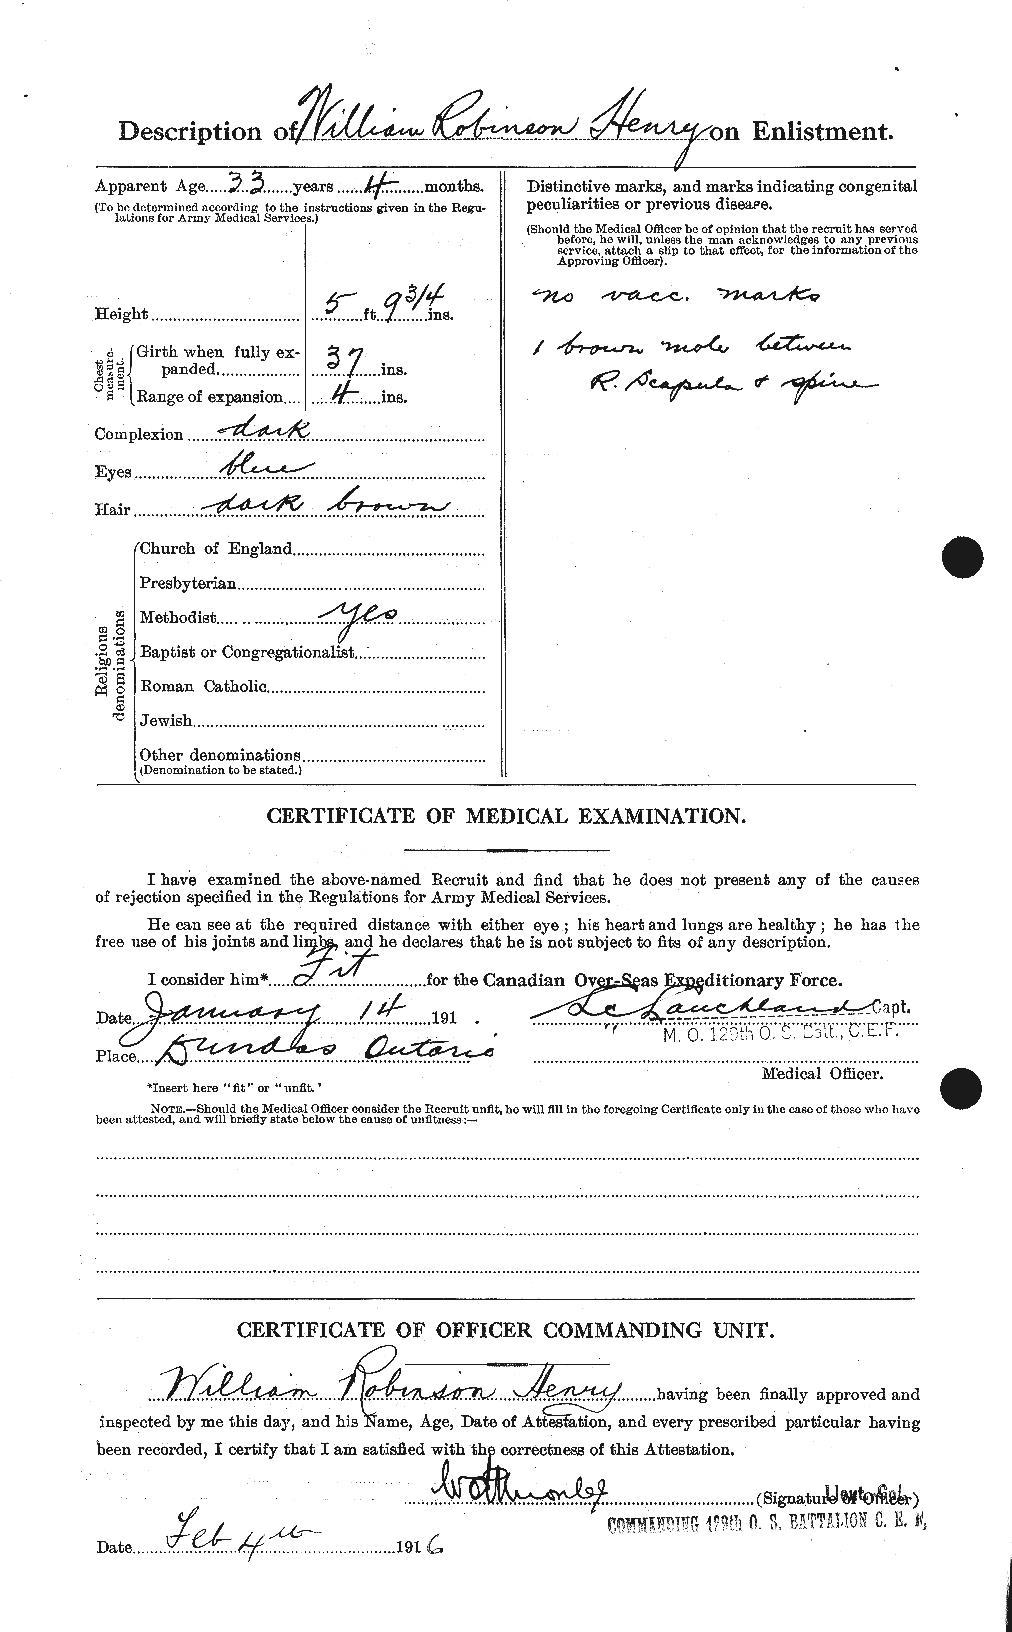 Personnel Records of the First World War - CEF 387797b